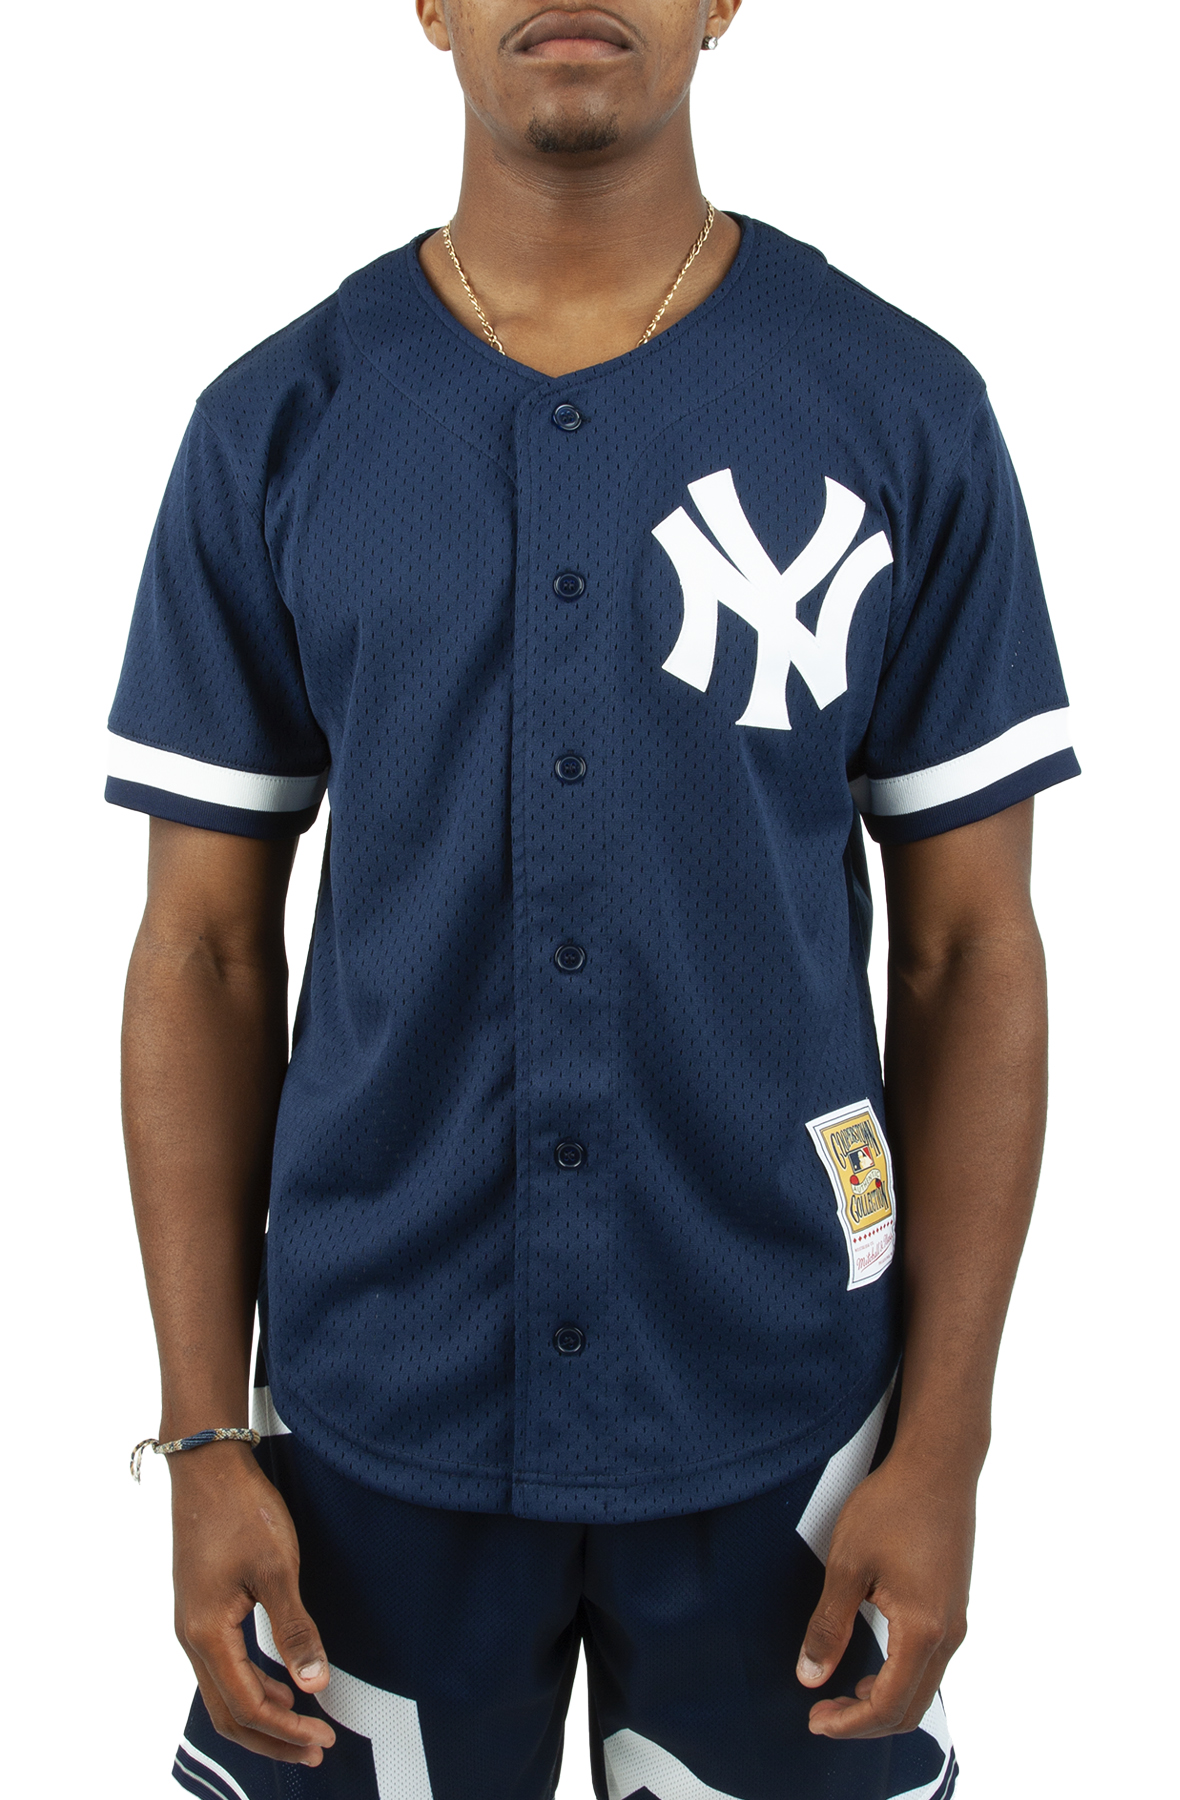 MITCHELL AND NESS Reggie Jackson New York Yankees 1997 Authentic Button  Front Jersey ABBF3098-NYY97RJKNAVY - Shiekh